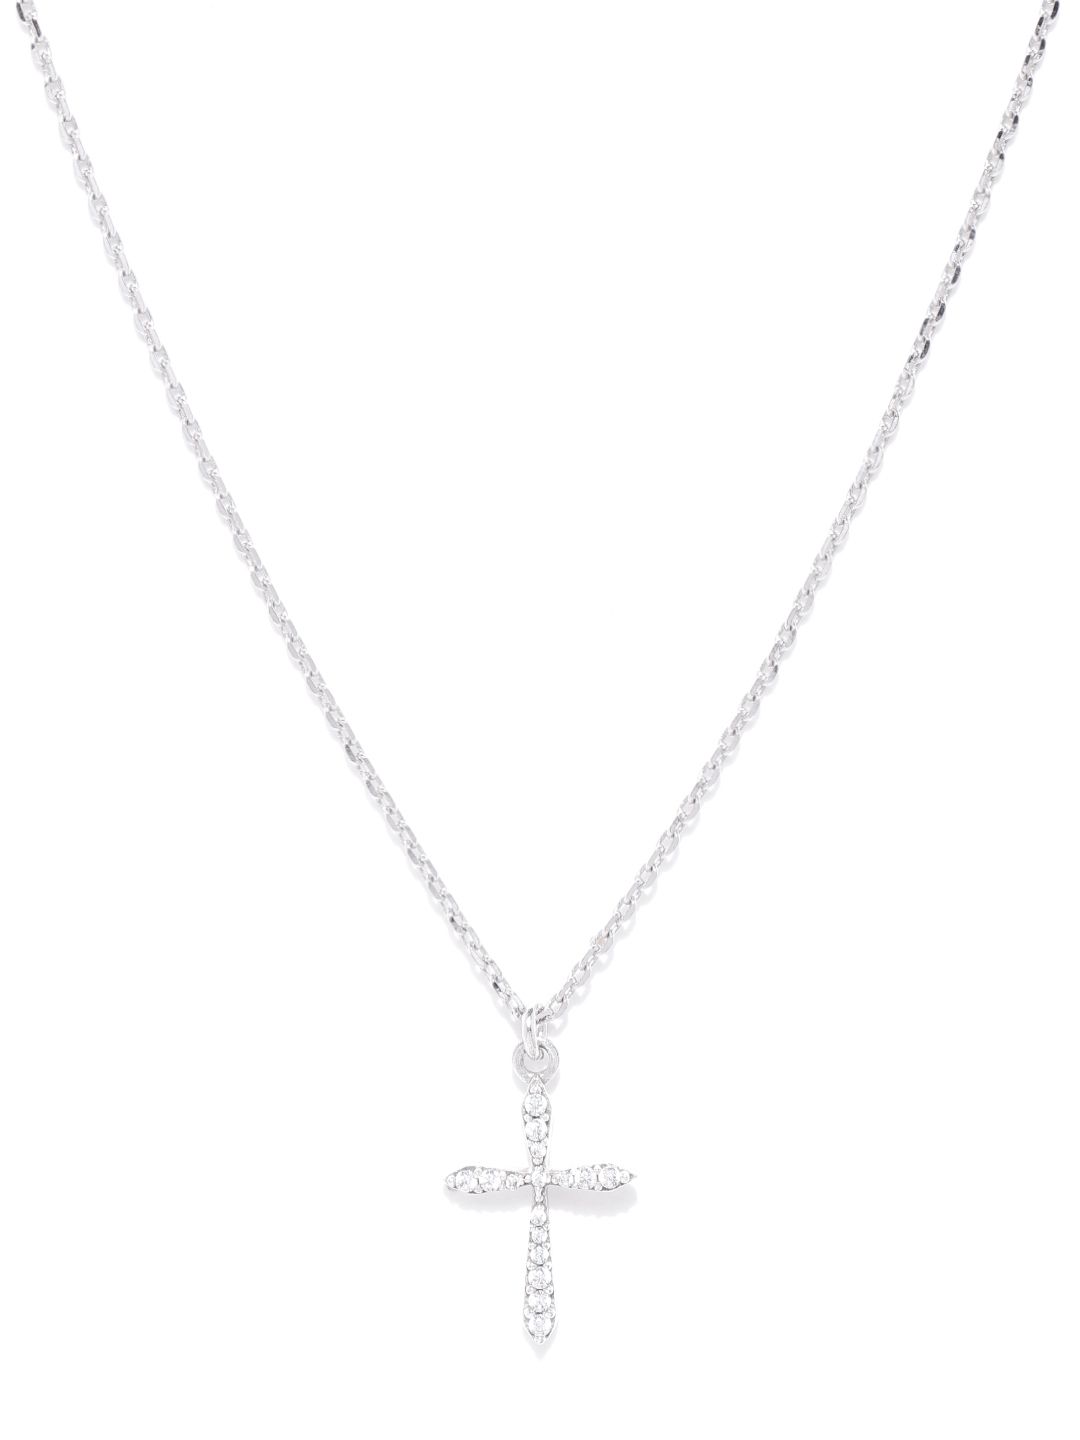 Carlton London Silver-Toned Rhodium-Plated CZ-Studded Cross Dangler Necklace Price in India